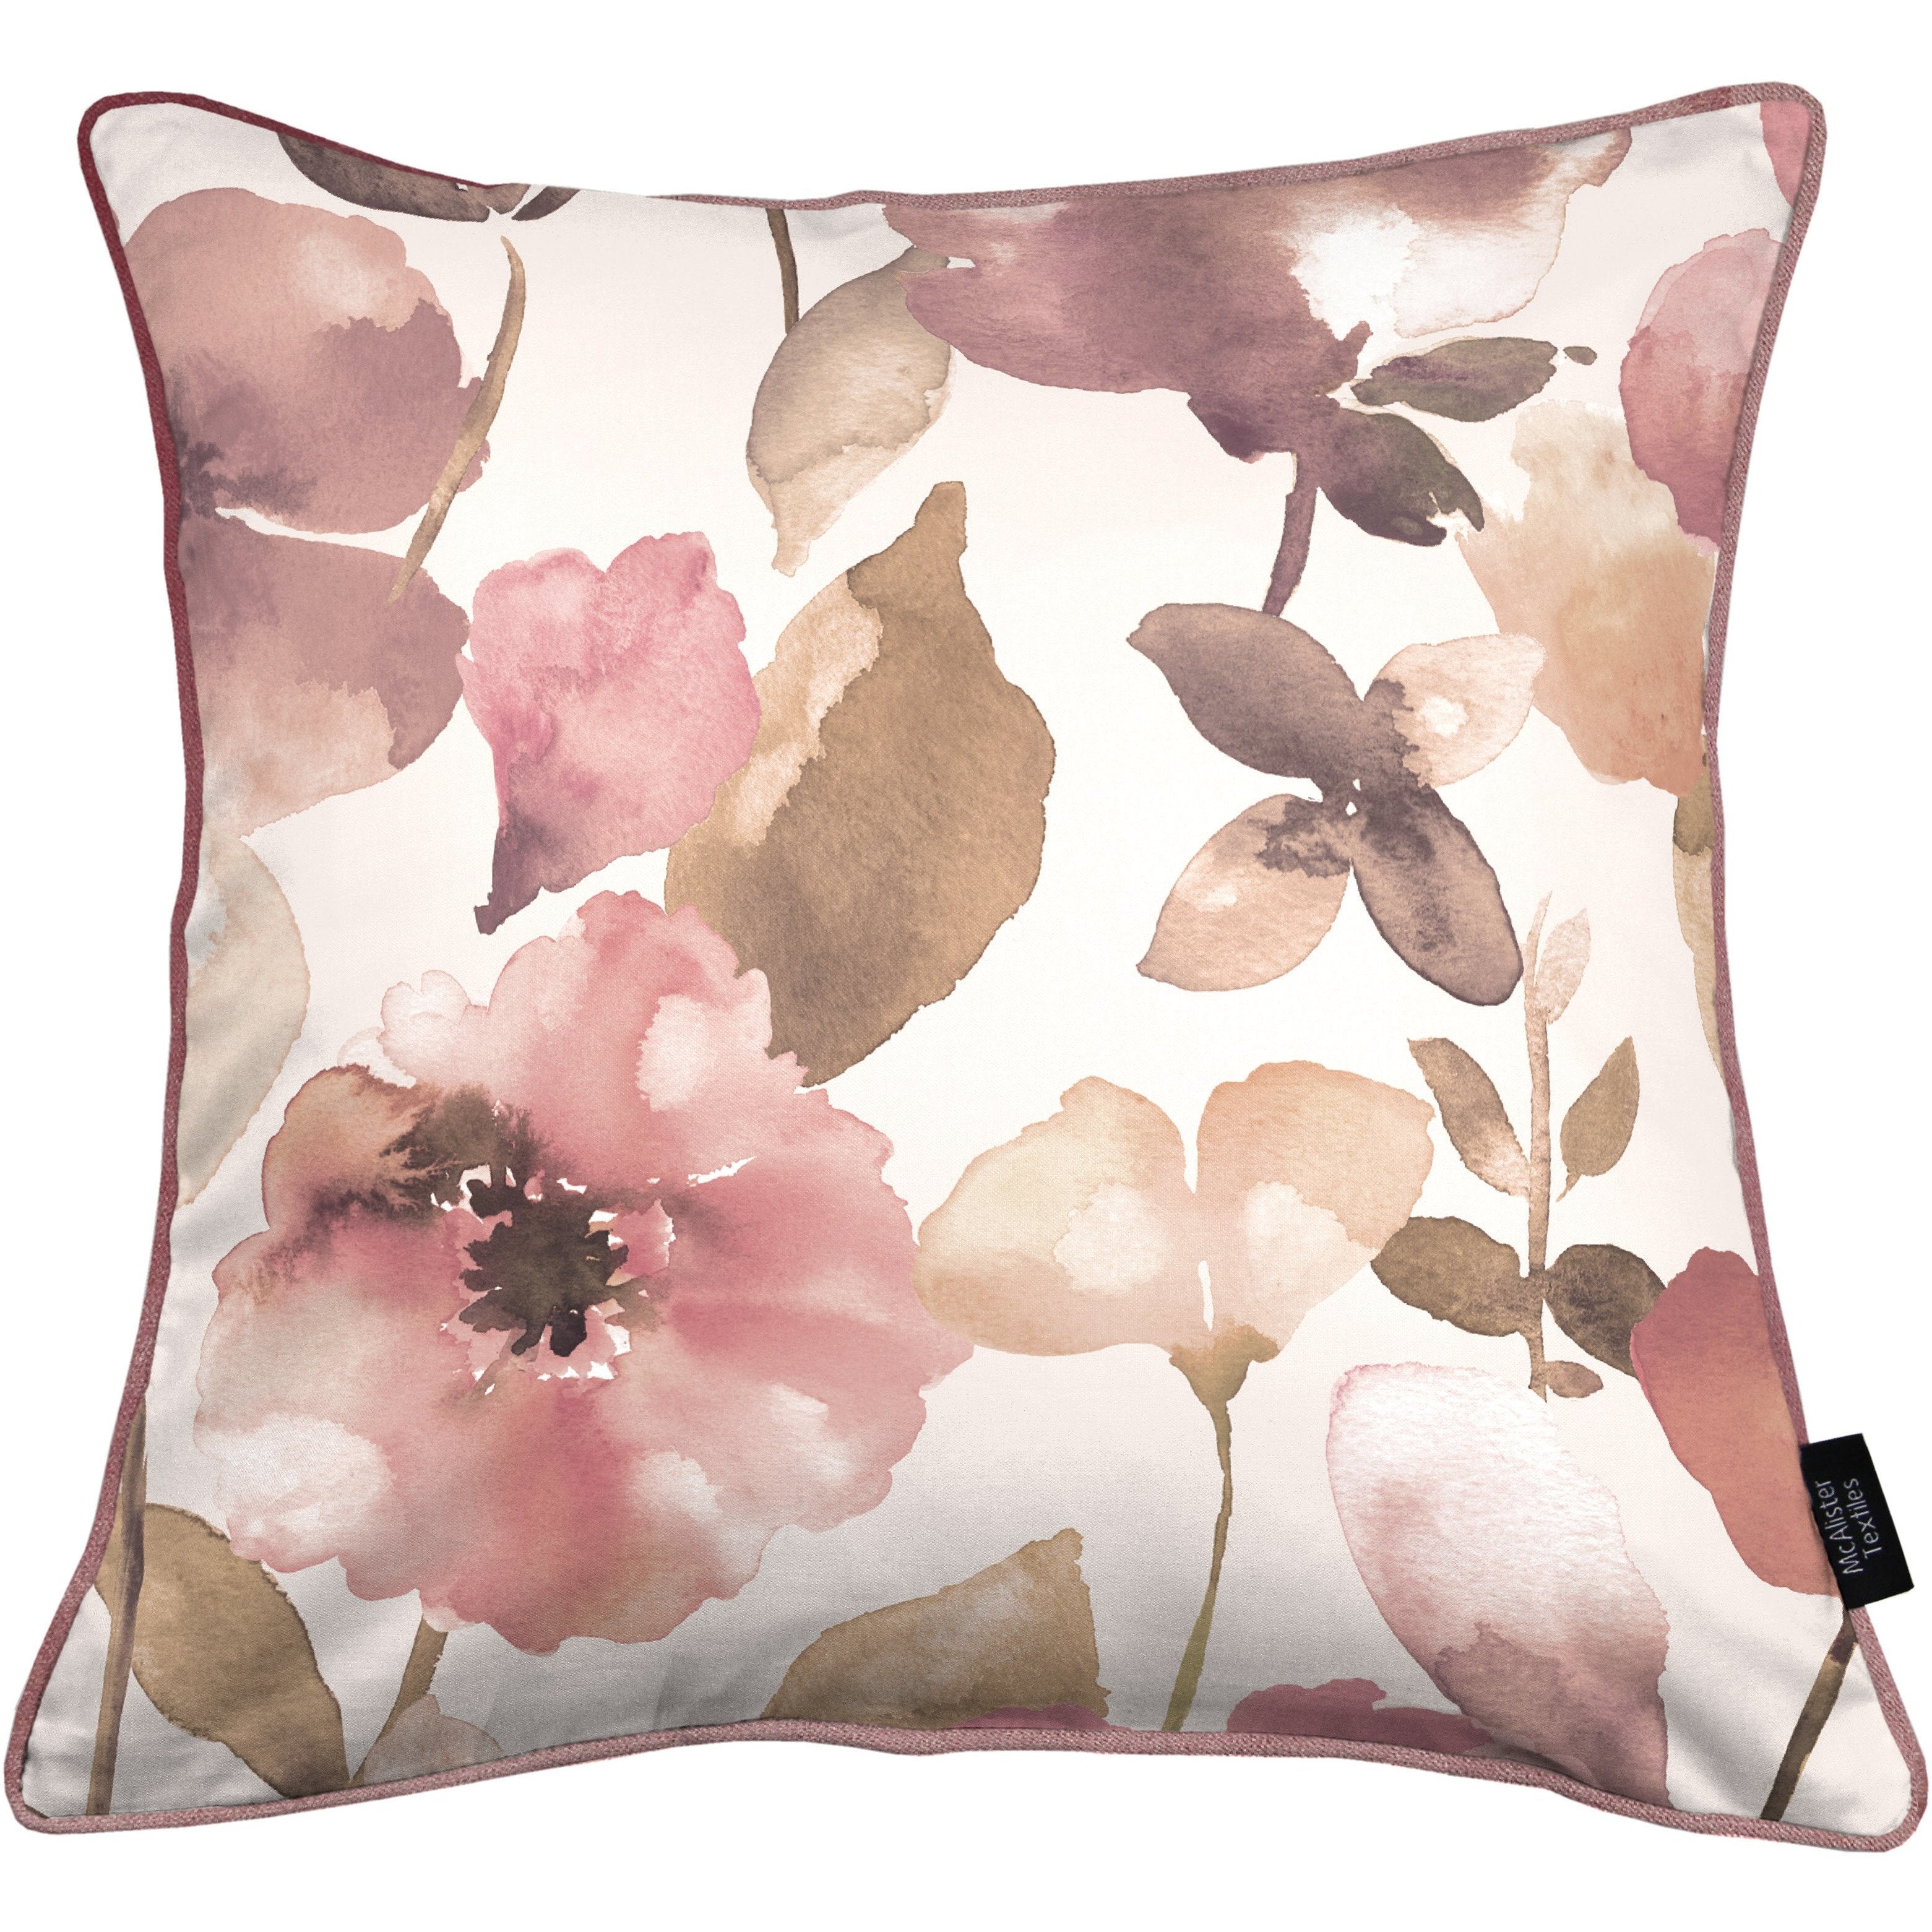 McAlister Textiles Blush Pink Floral Velvet Cushion Cushions and Covers Polyester Filler 43cm x 43cm 